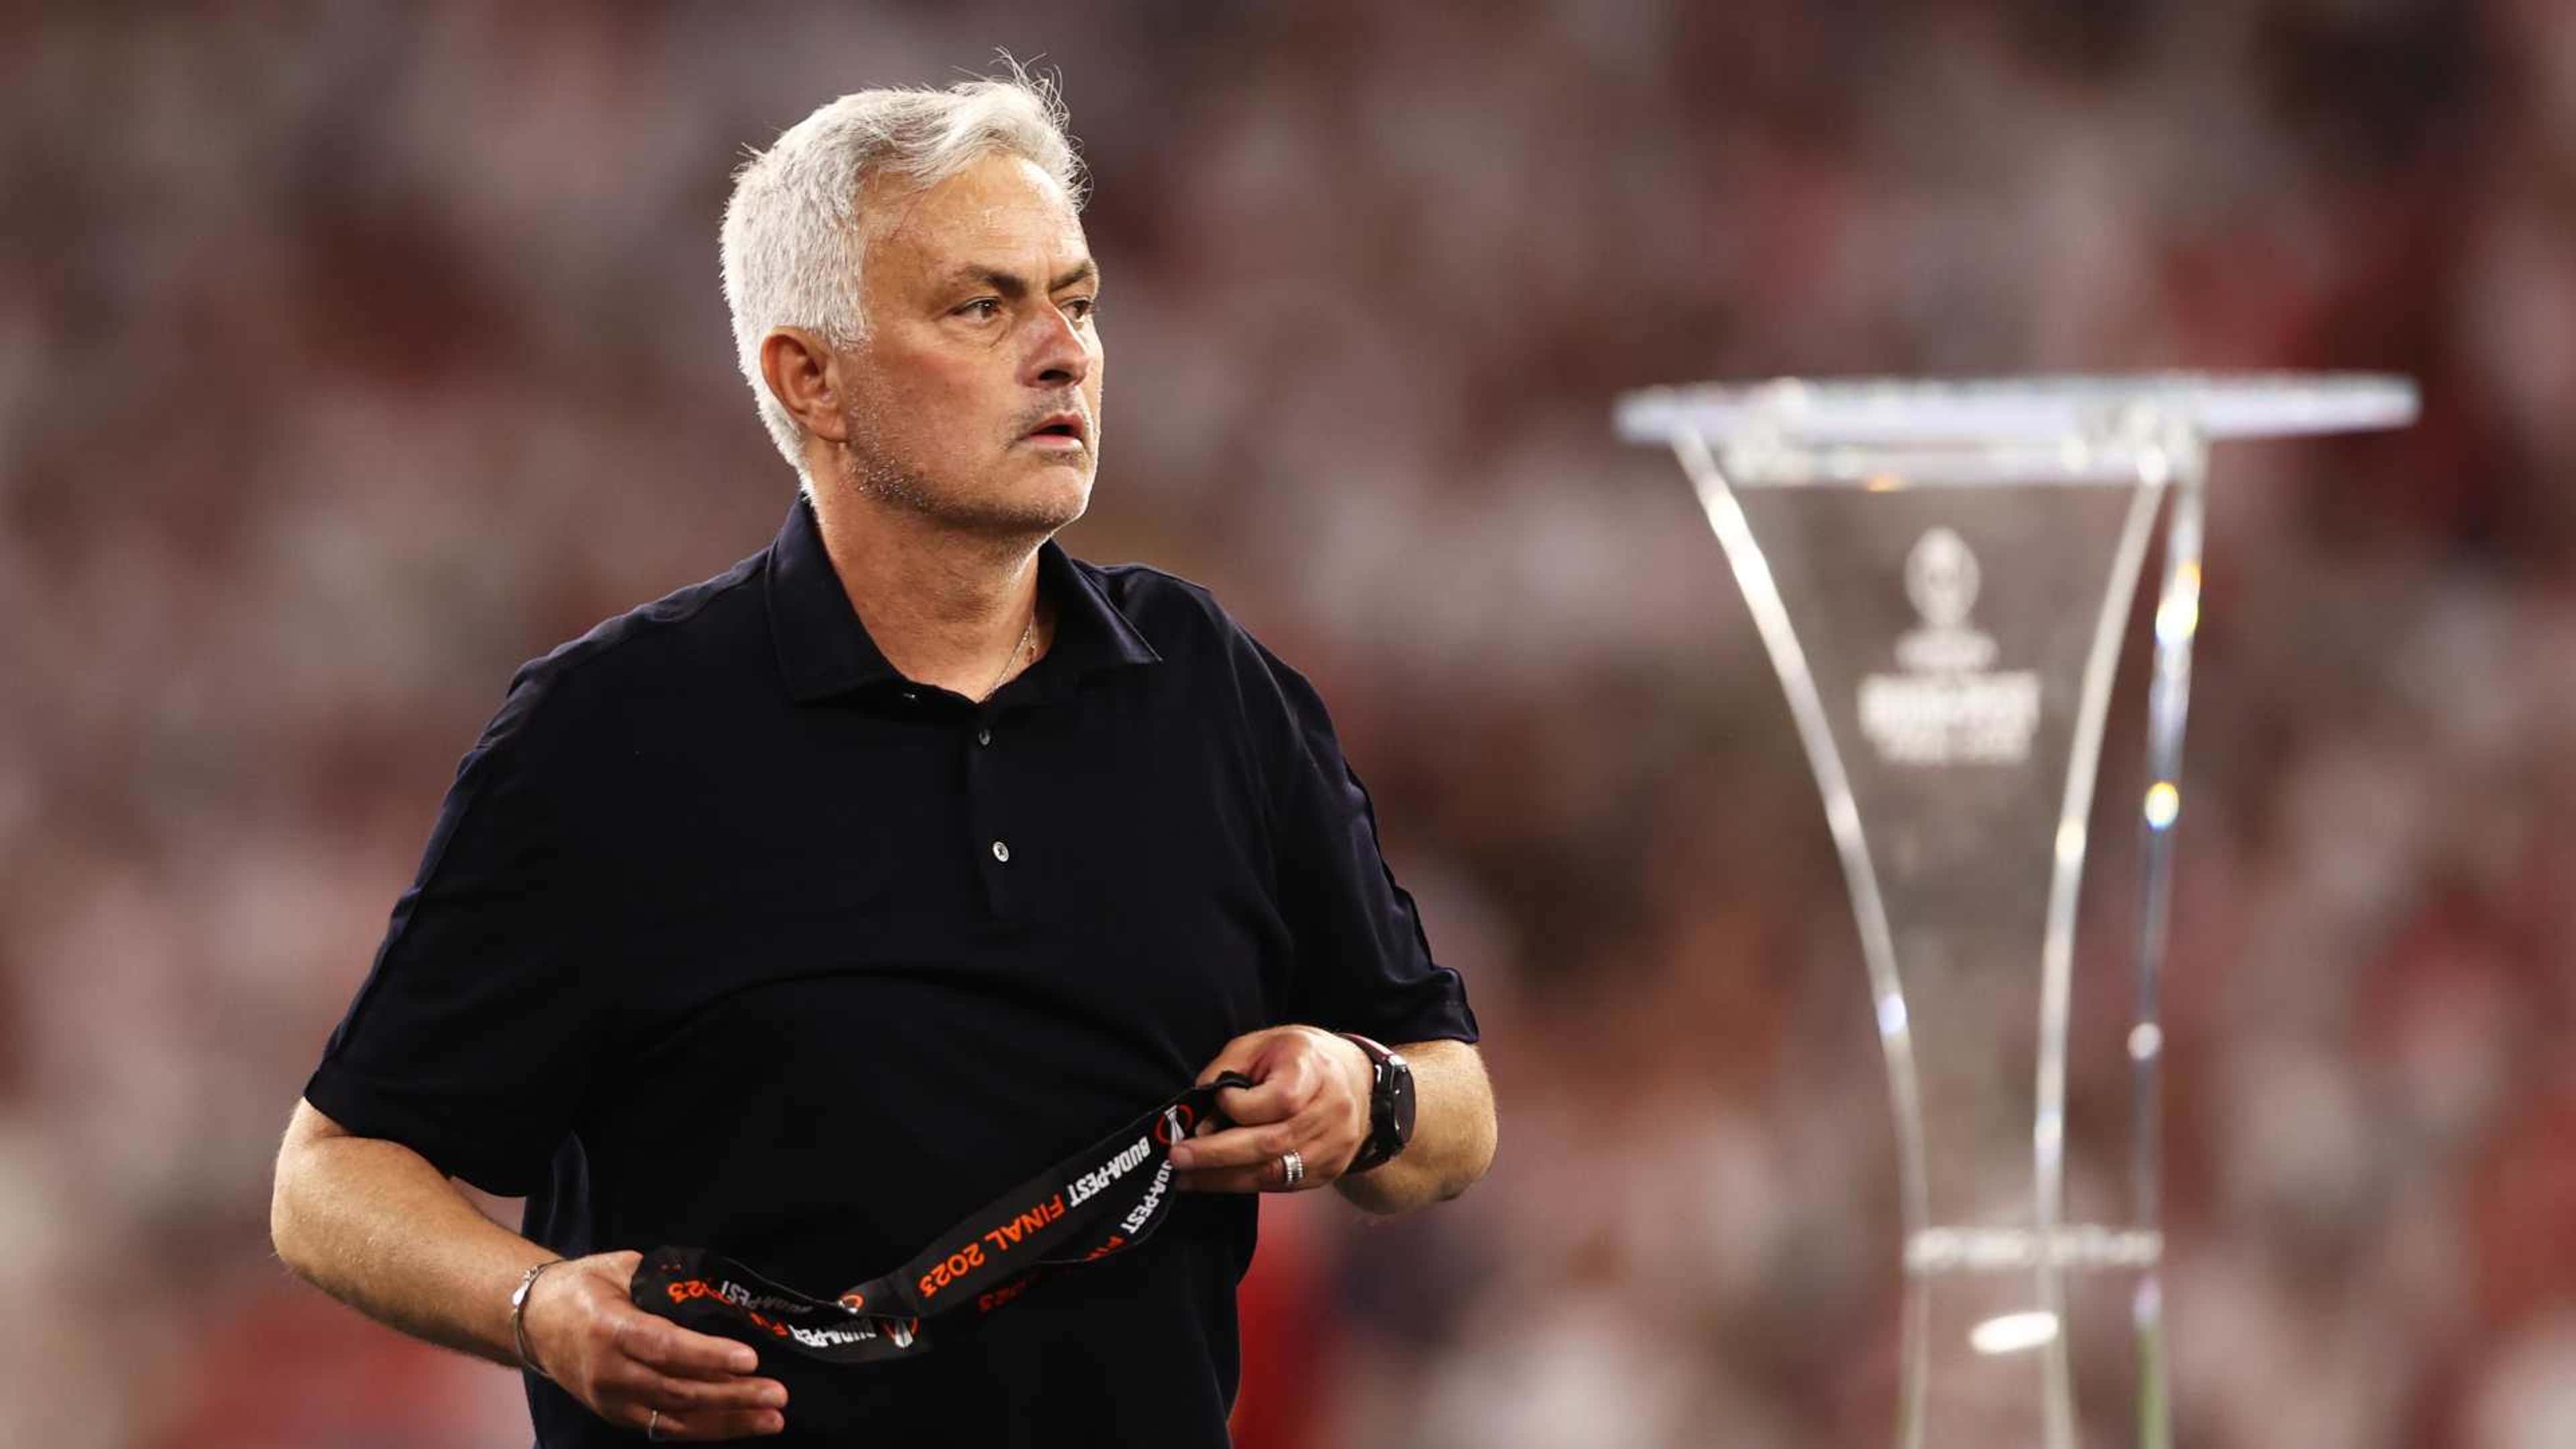 WATCH: Jose Mourinho throws his Europa League runners-up medal to young fan  after Roma's agonising shoot-out defeat to Sevilla | Goal.com Ghana